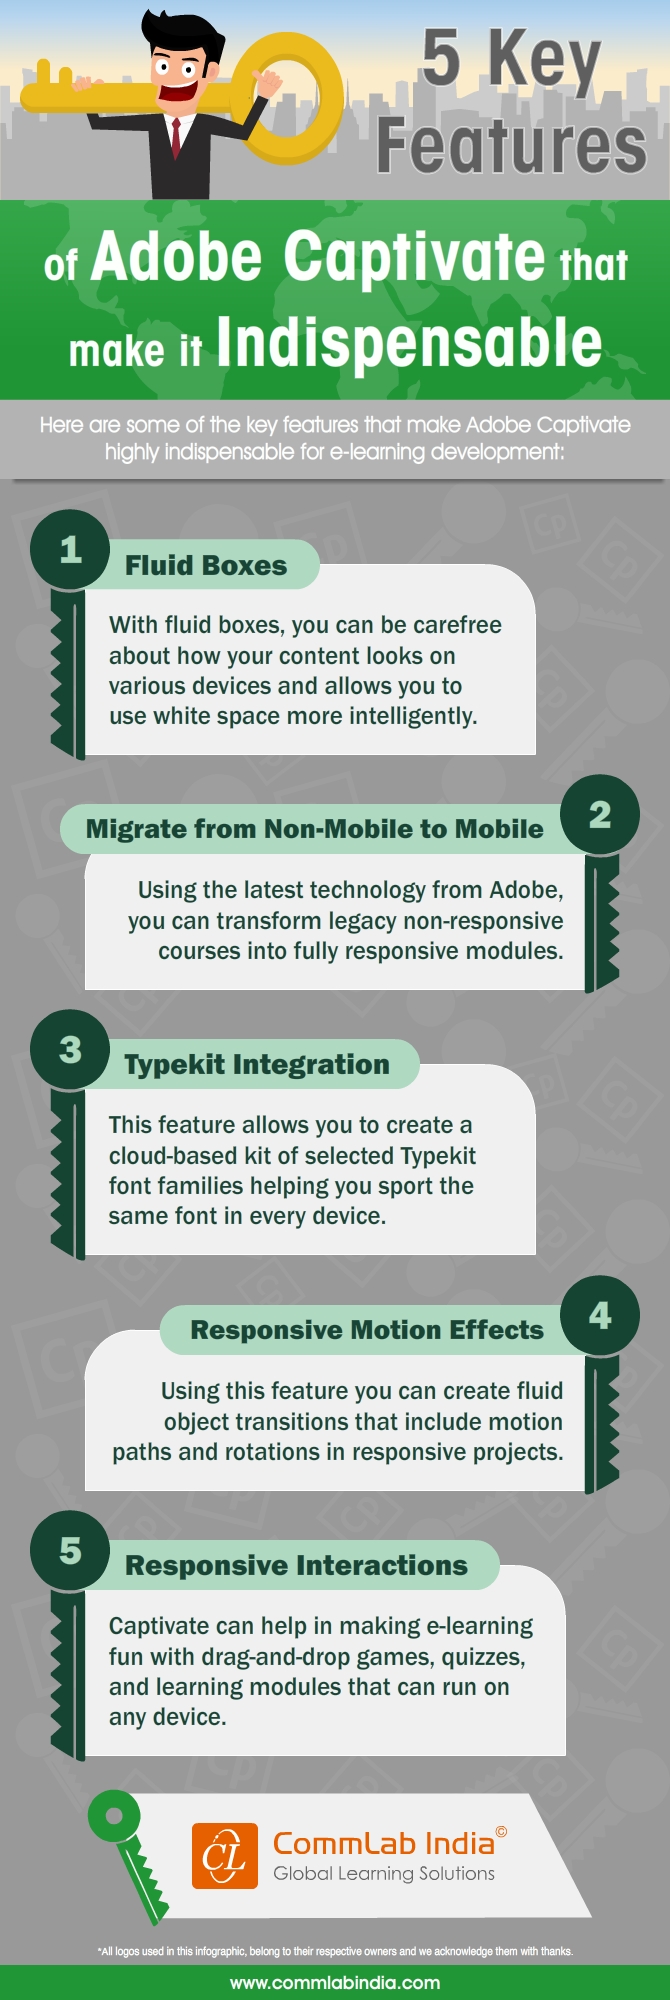 5 Key Features of Adobe Captivate that Make It Indispensable [Infographic]